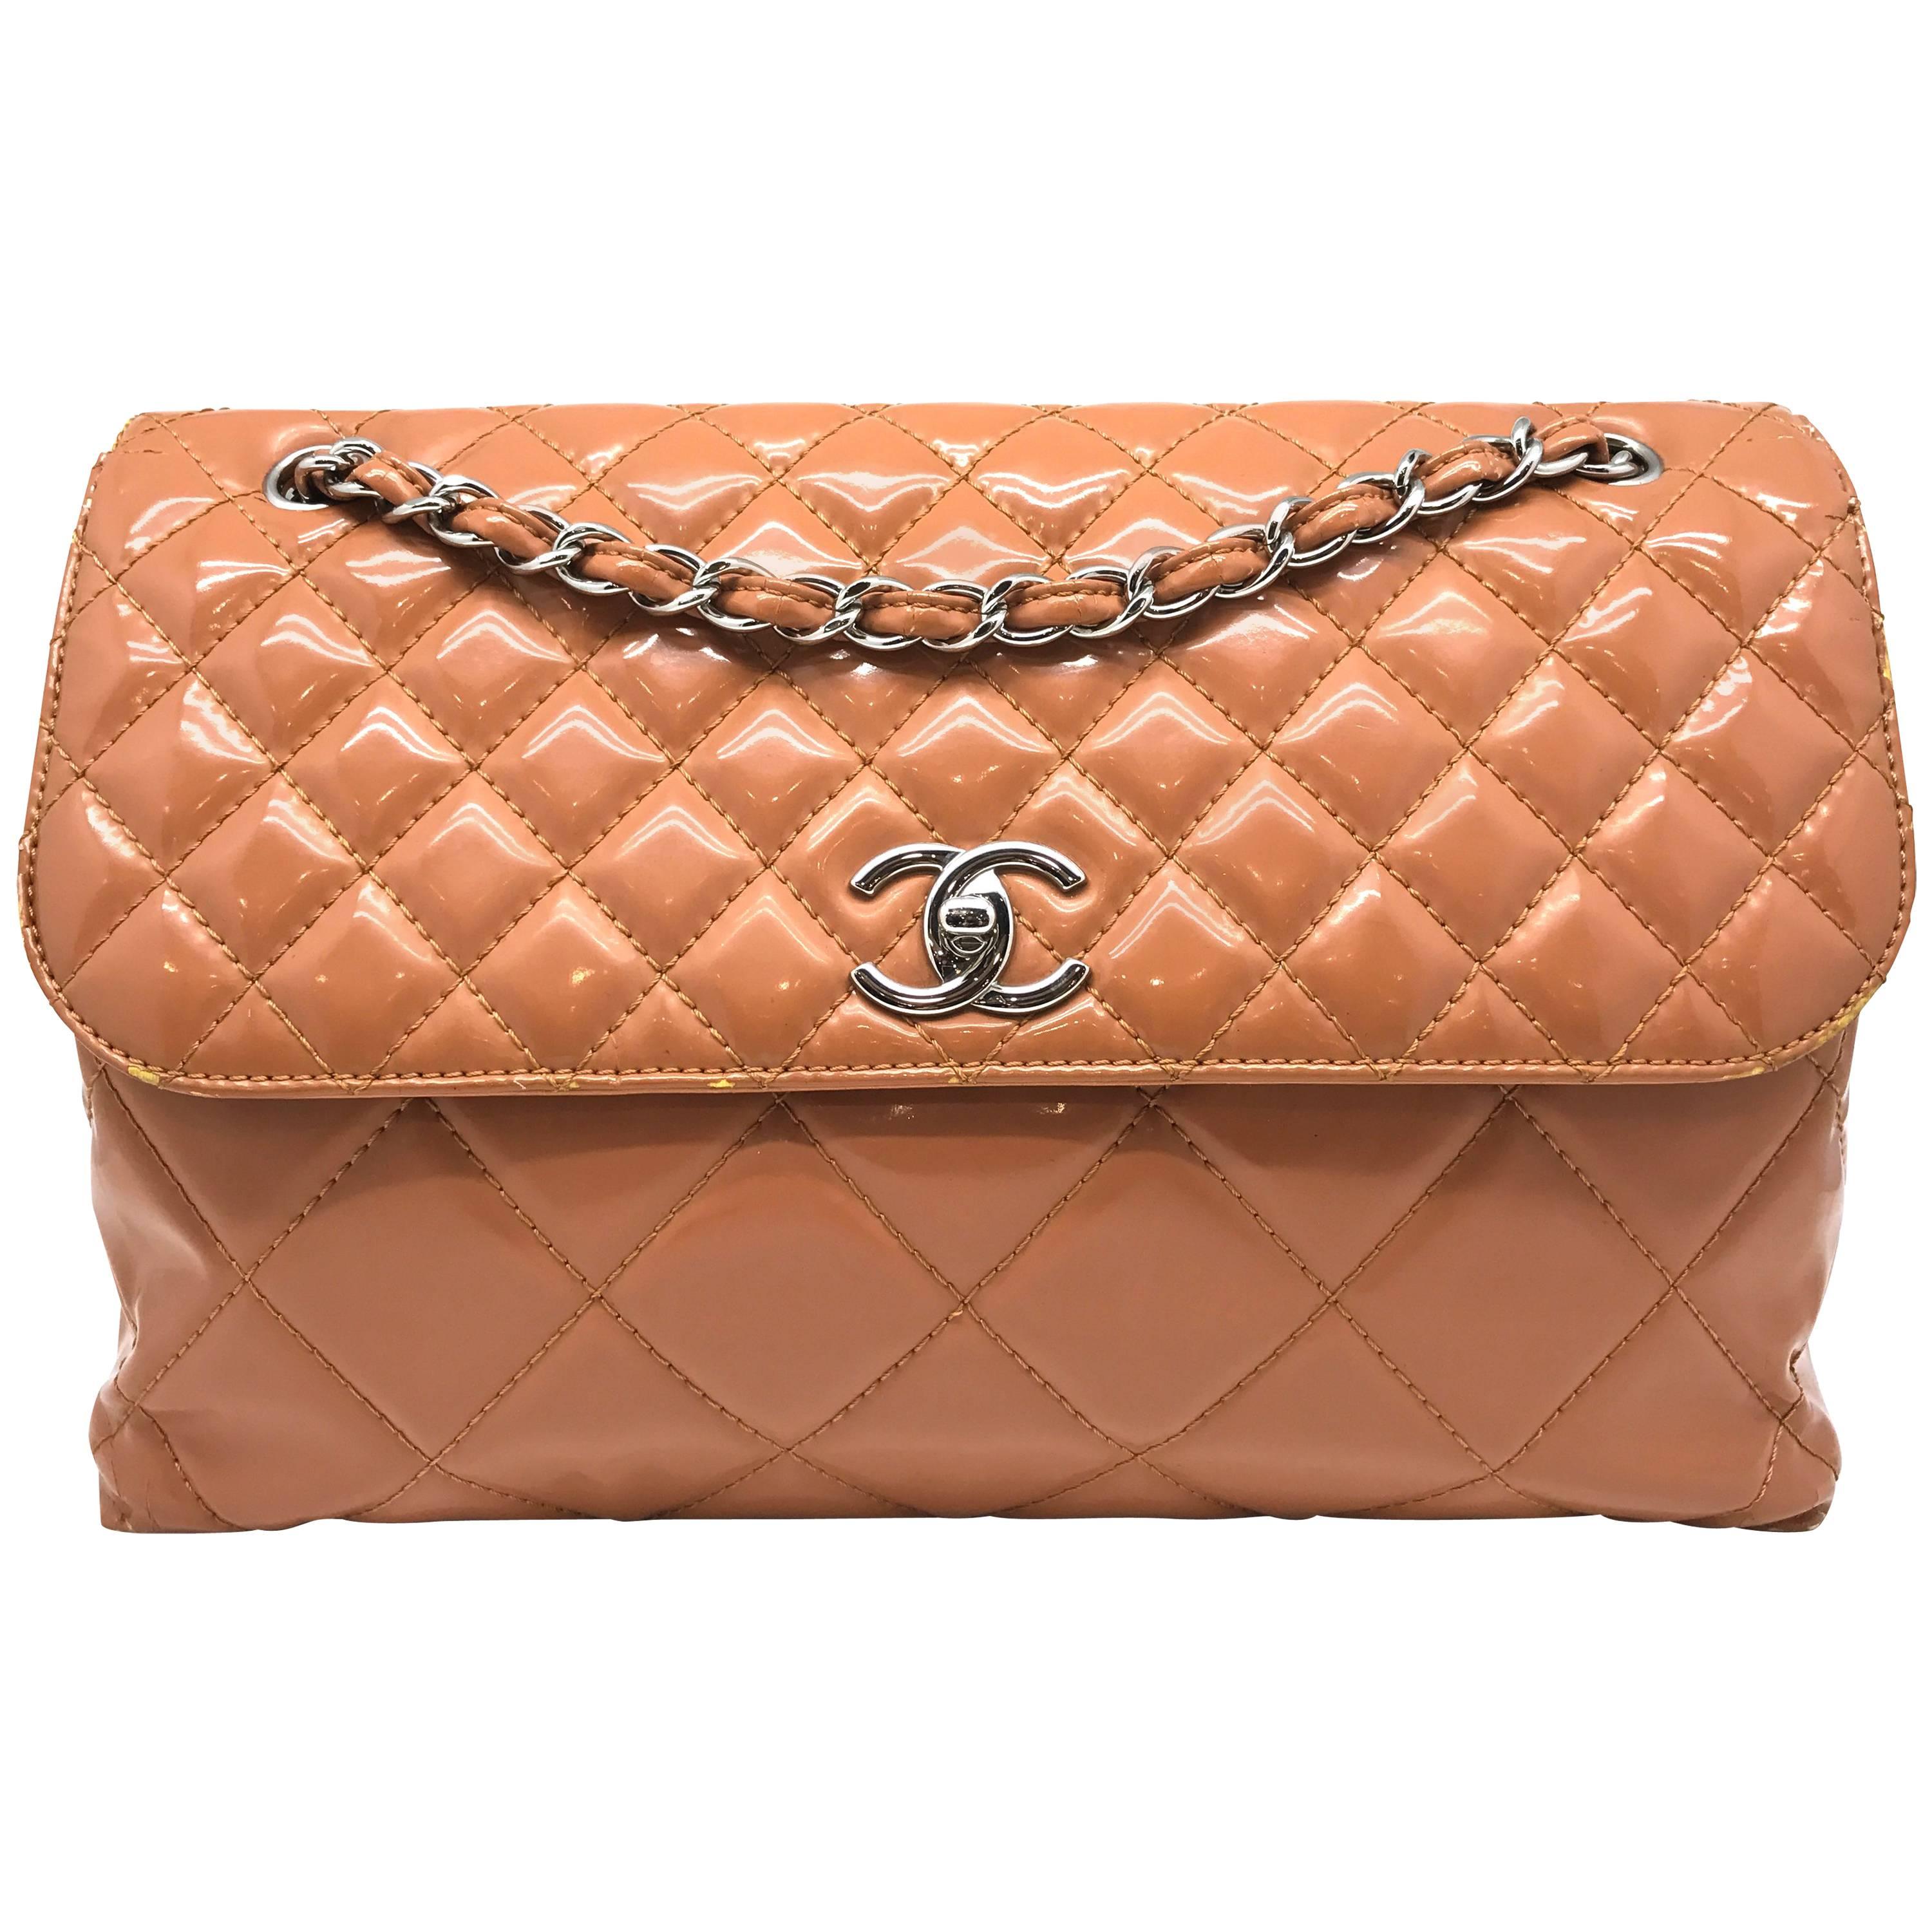 Chanel Orange Quilted Patent Leather SHW Chain Shoulder Bag For Sale